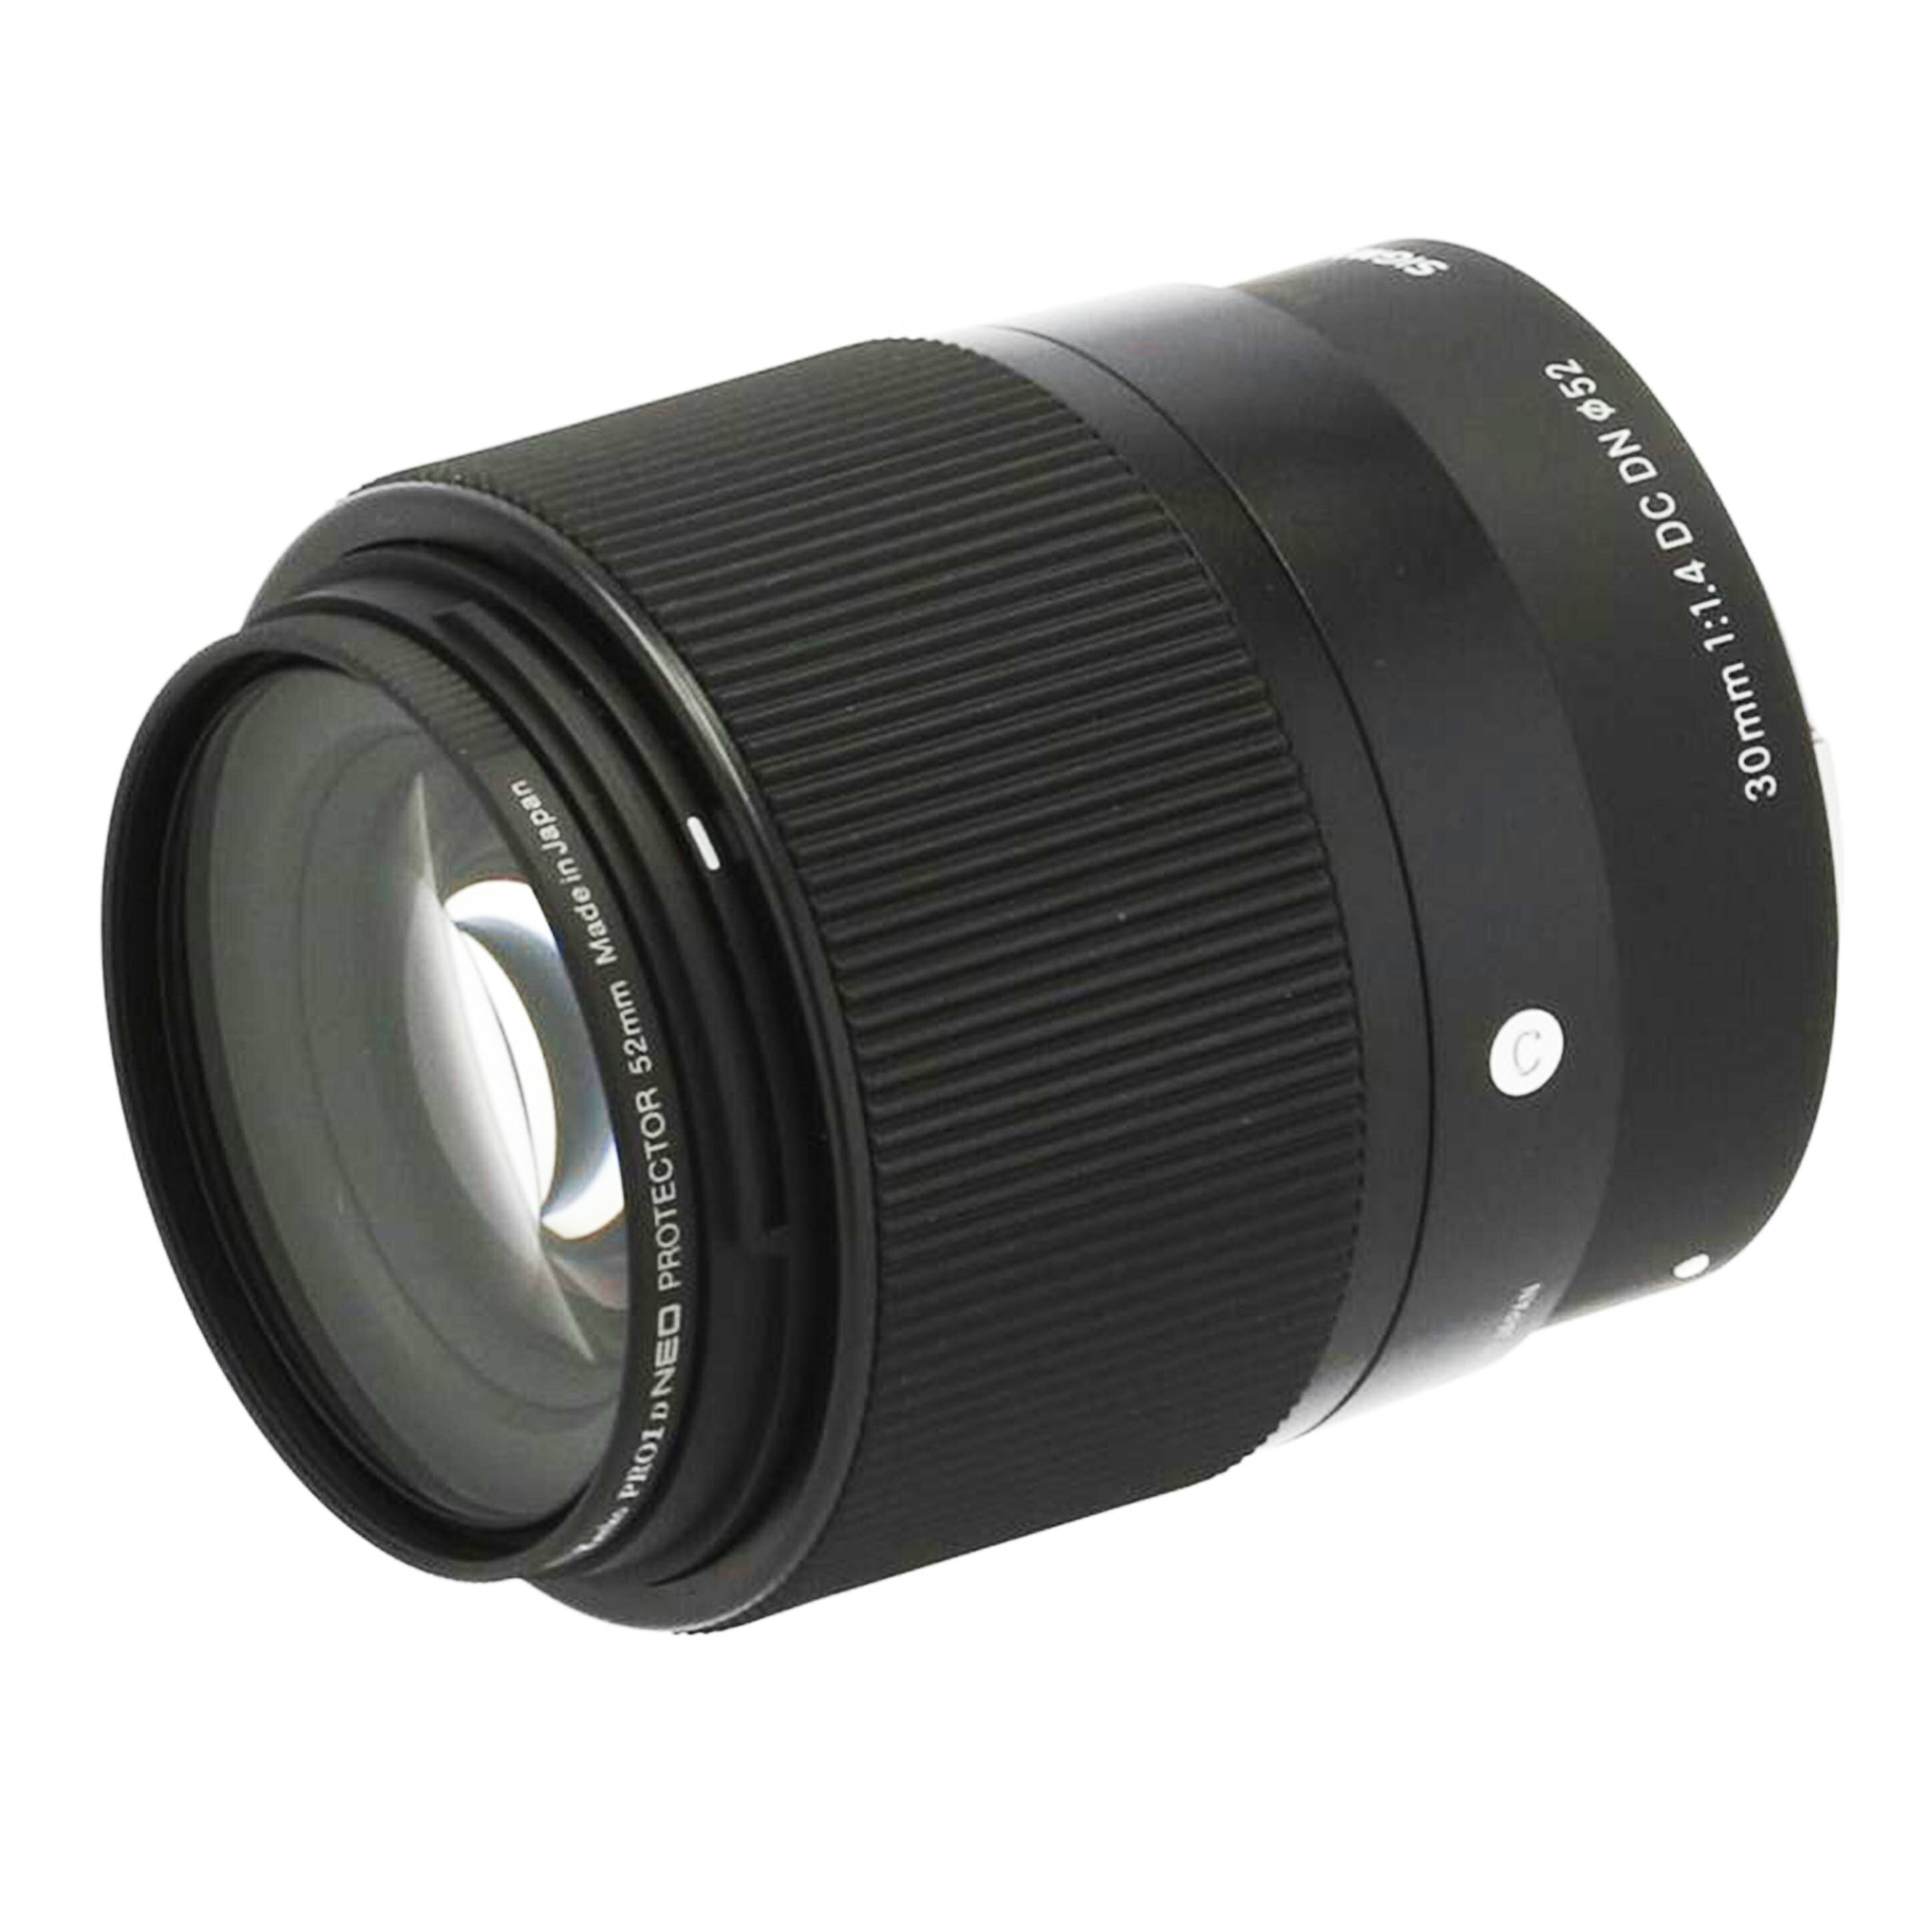 SIGMA シグマ/交換レンズ/30mm For SONY E/30mm F1.4 DC DN/57488959/Aランク/67【中古】